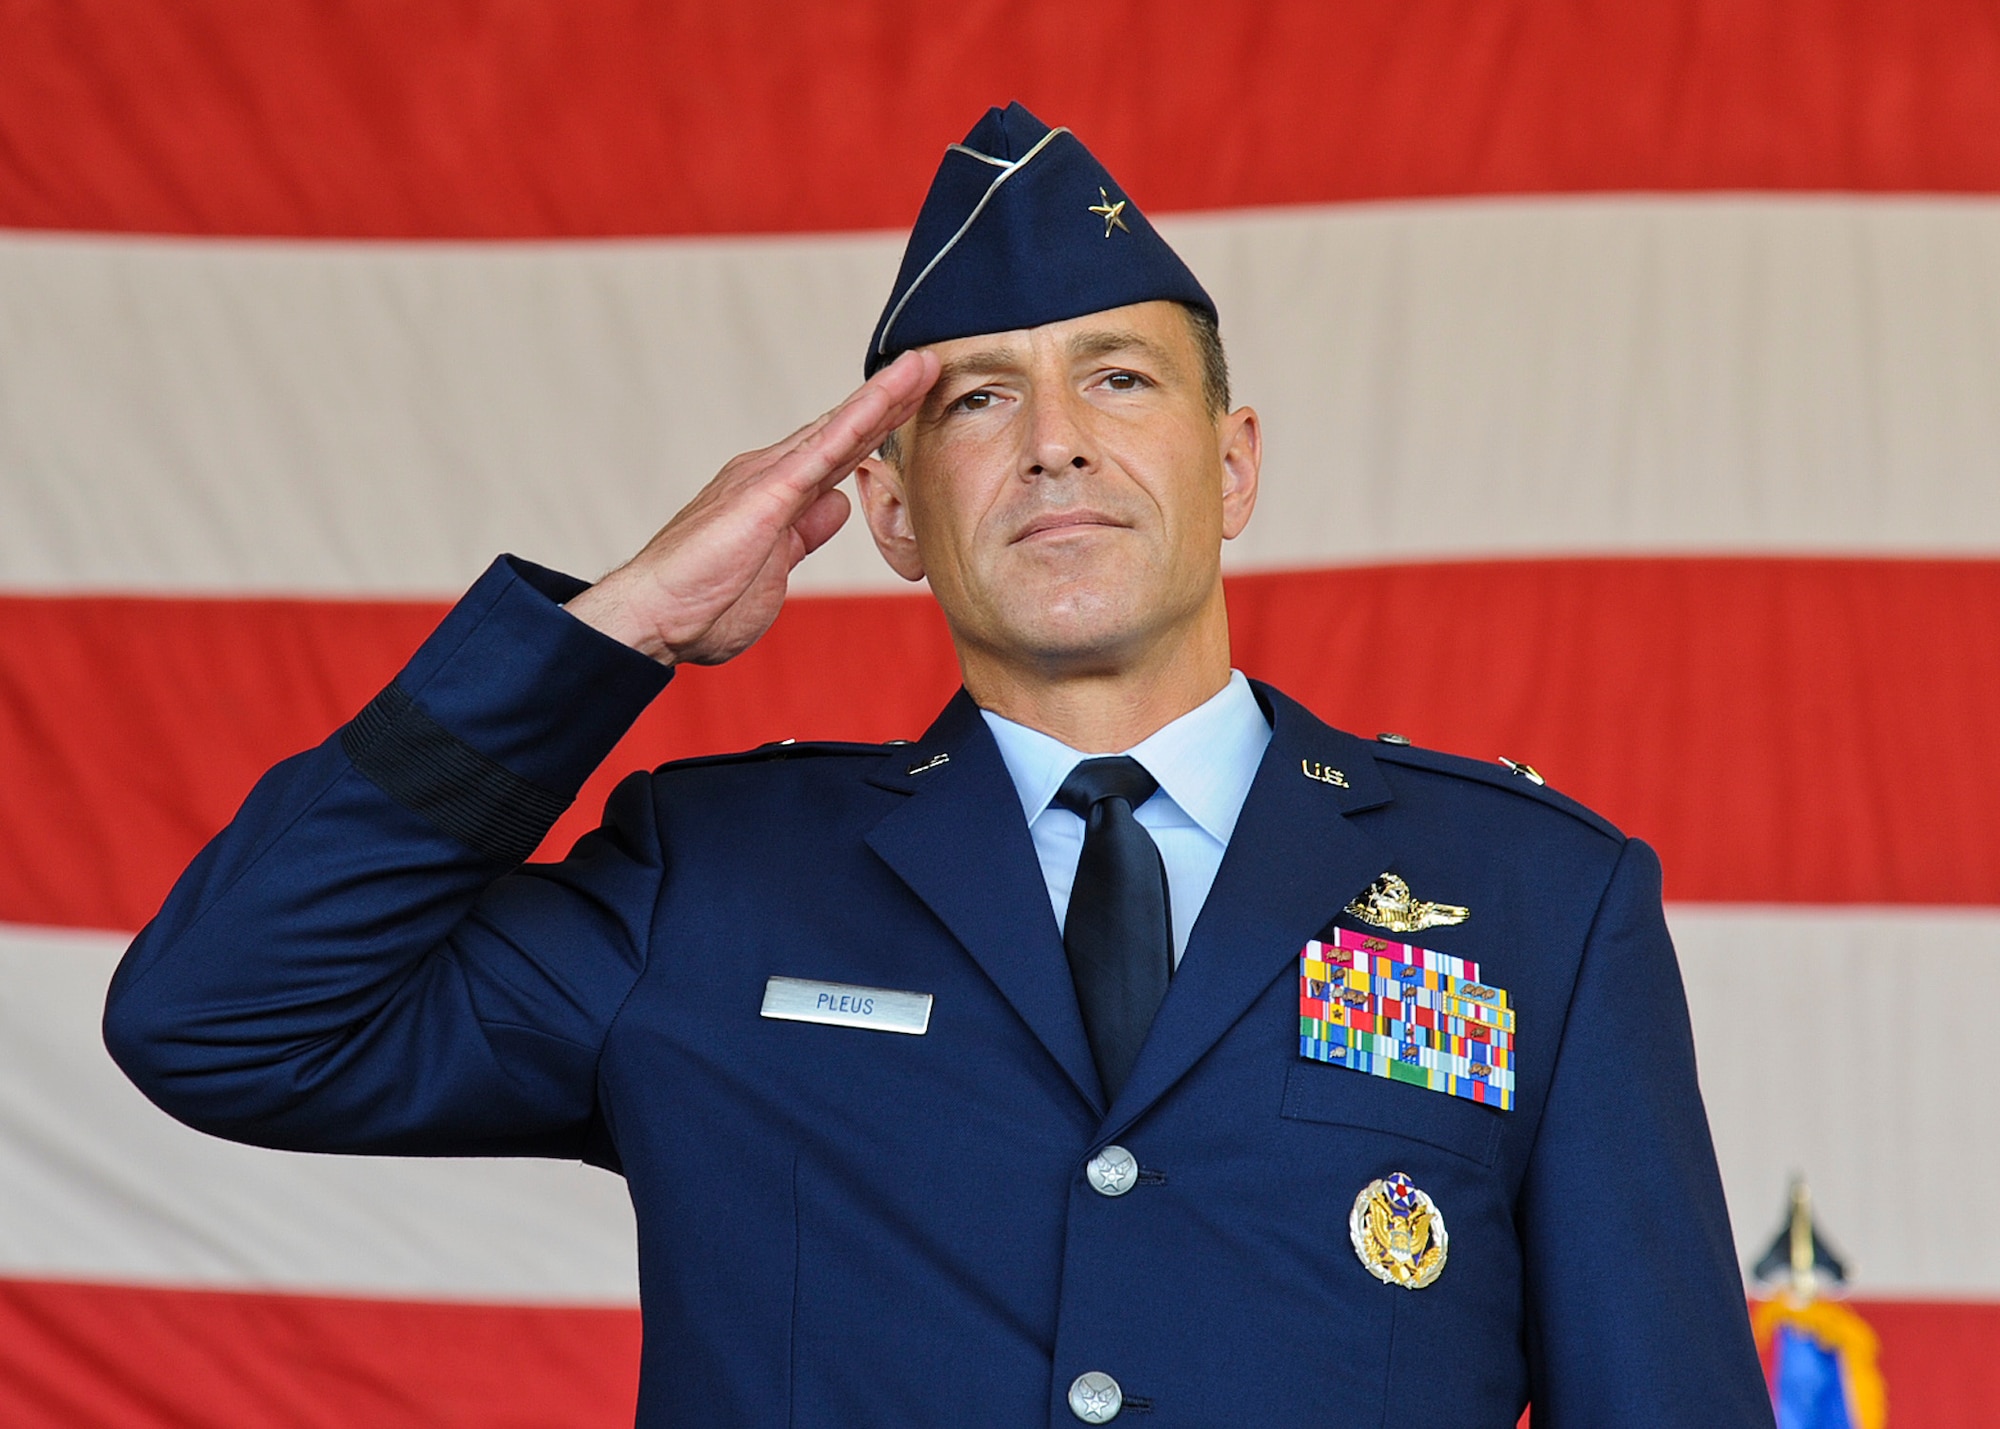 Brig. Gen. Scott Pleus, 56th Fighter Wing commander, renders his first salute to the wing after assuming command during a ceremony June 20 at Luke Air Force Base. (U.S. Air Force photo/Staff Sgt. Darlene Setlmann)